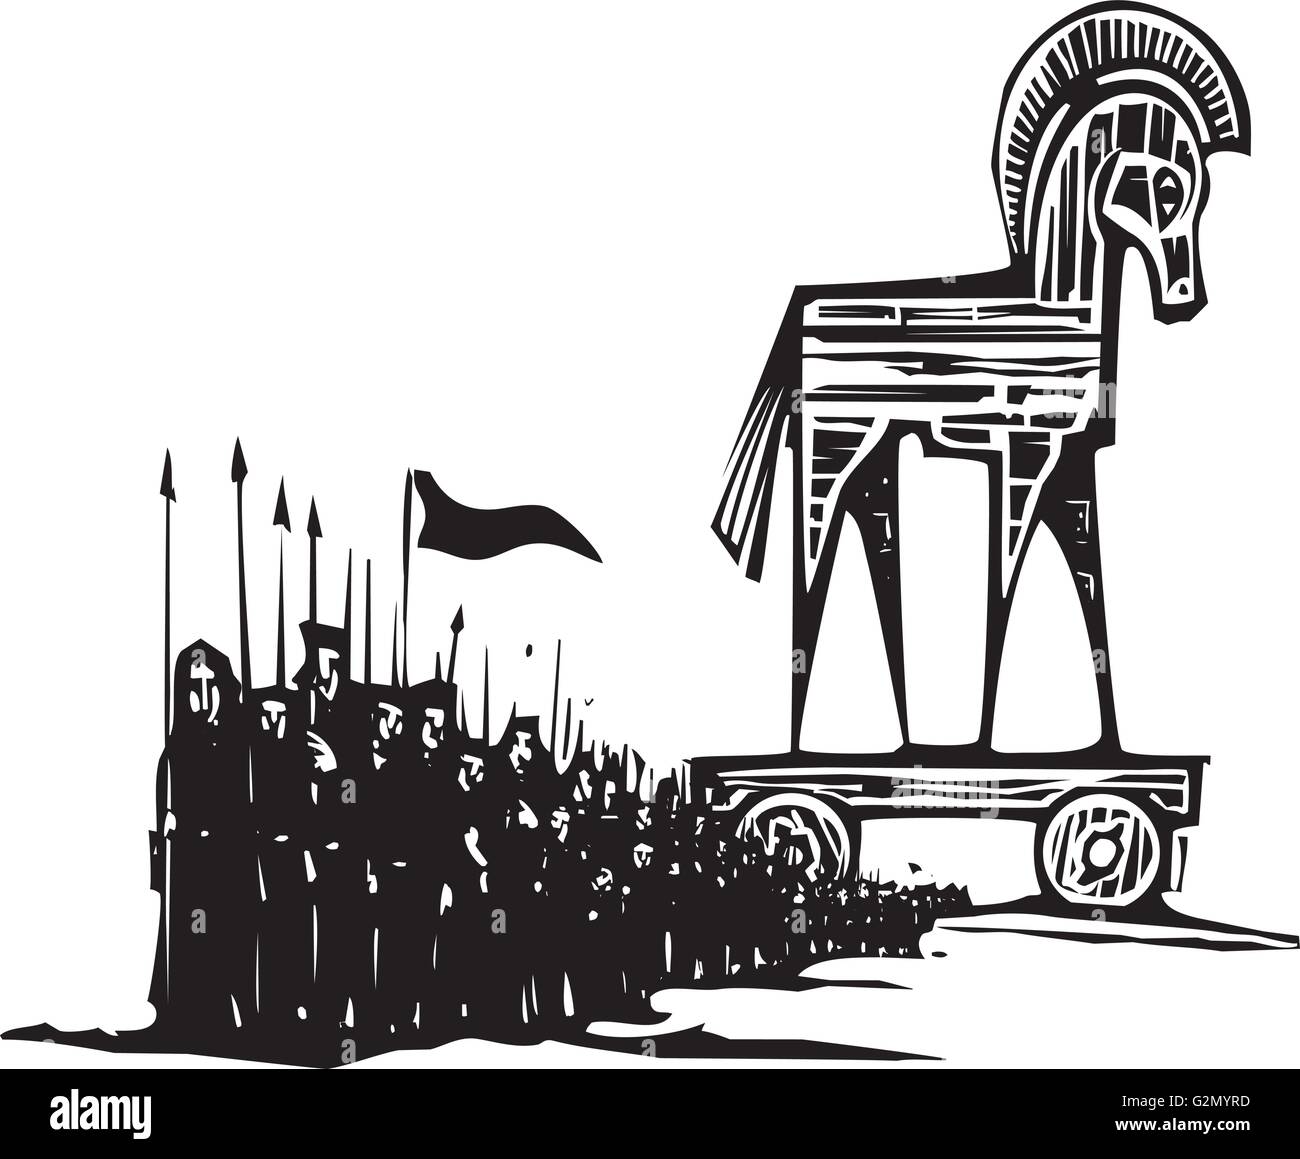 Woodcut style expressionist image of the Greek Trojan Horse with an army walking from it. Stock Vector